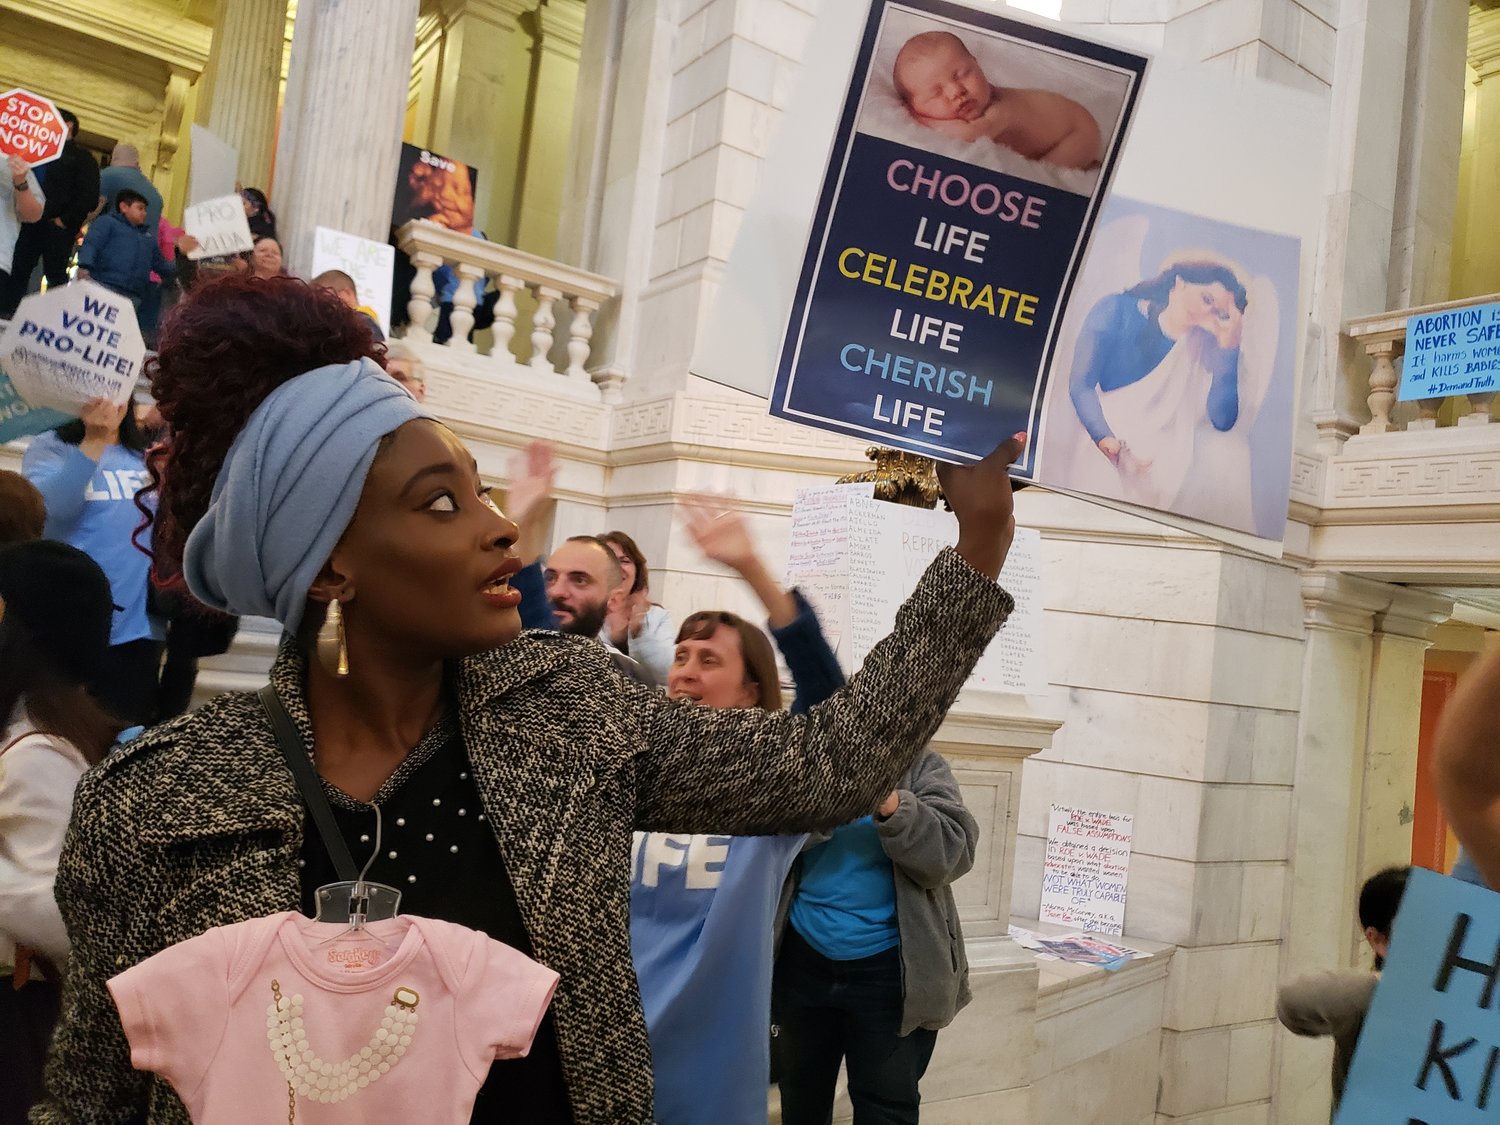 Elizabeth Koroma of Providence holds aloft pro-life signs in opposition to a Senate bill to expand legal abortion in Rhode Island.